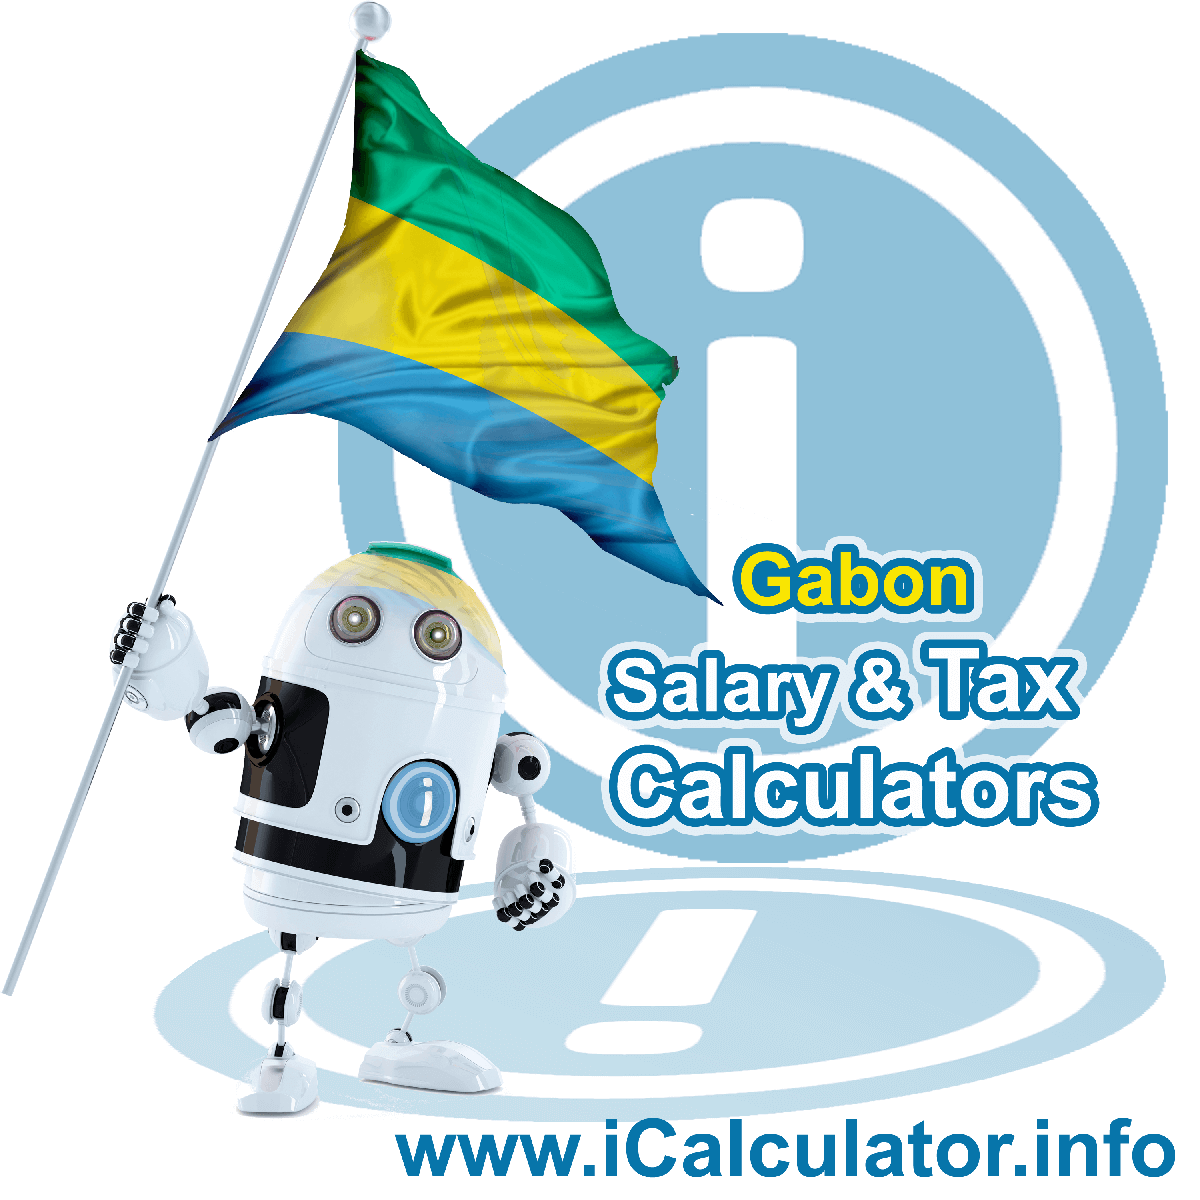 Gabon Tax Calculator. This image shows the Gabon flag and information relating to the tax formula for the Gabon Salary Calculator